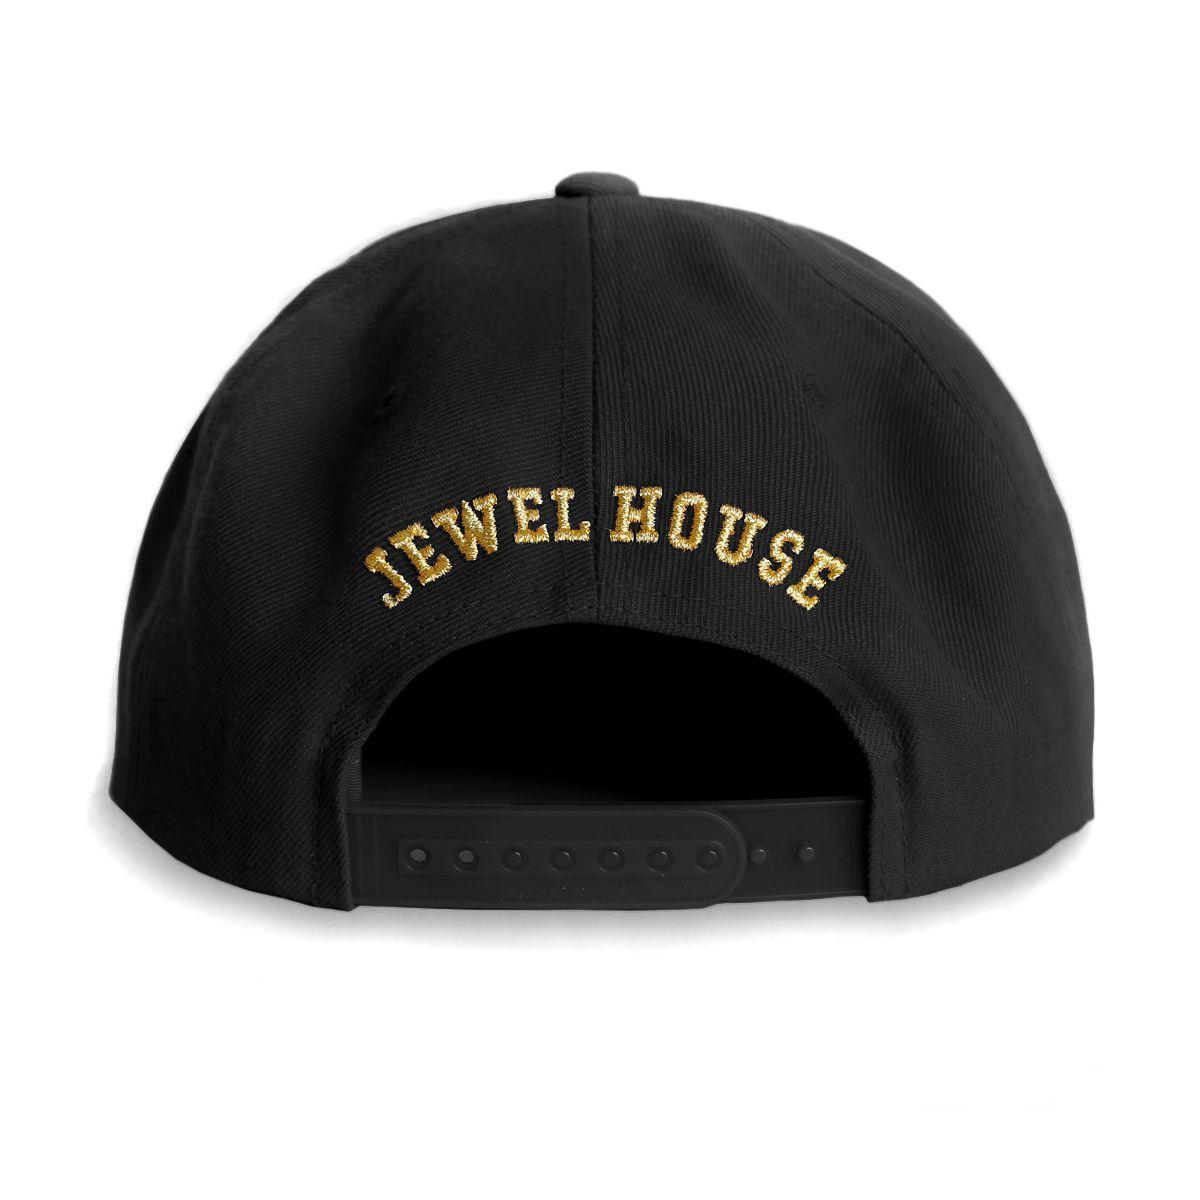 Jewel House Clothing Logo - Boosie Launches Jewel House Clothing Line. the Urban Coin